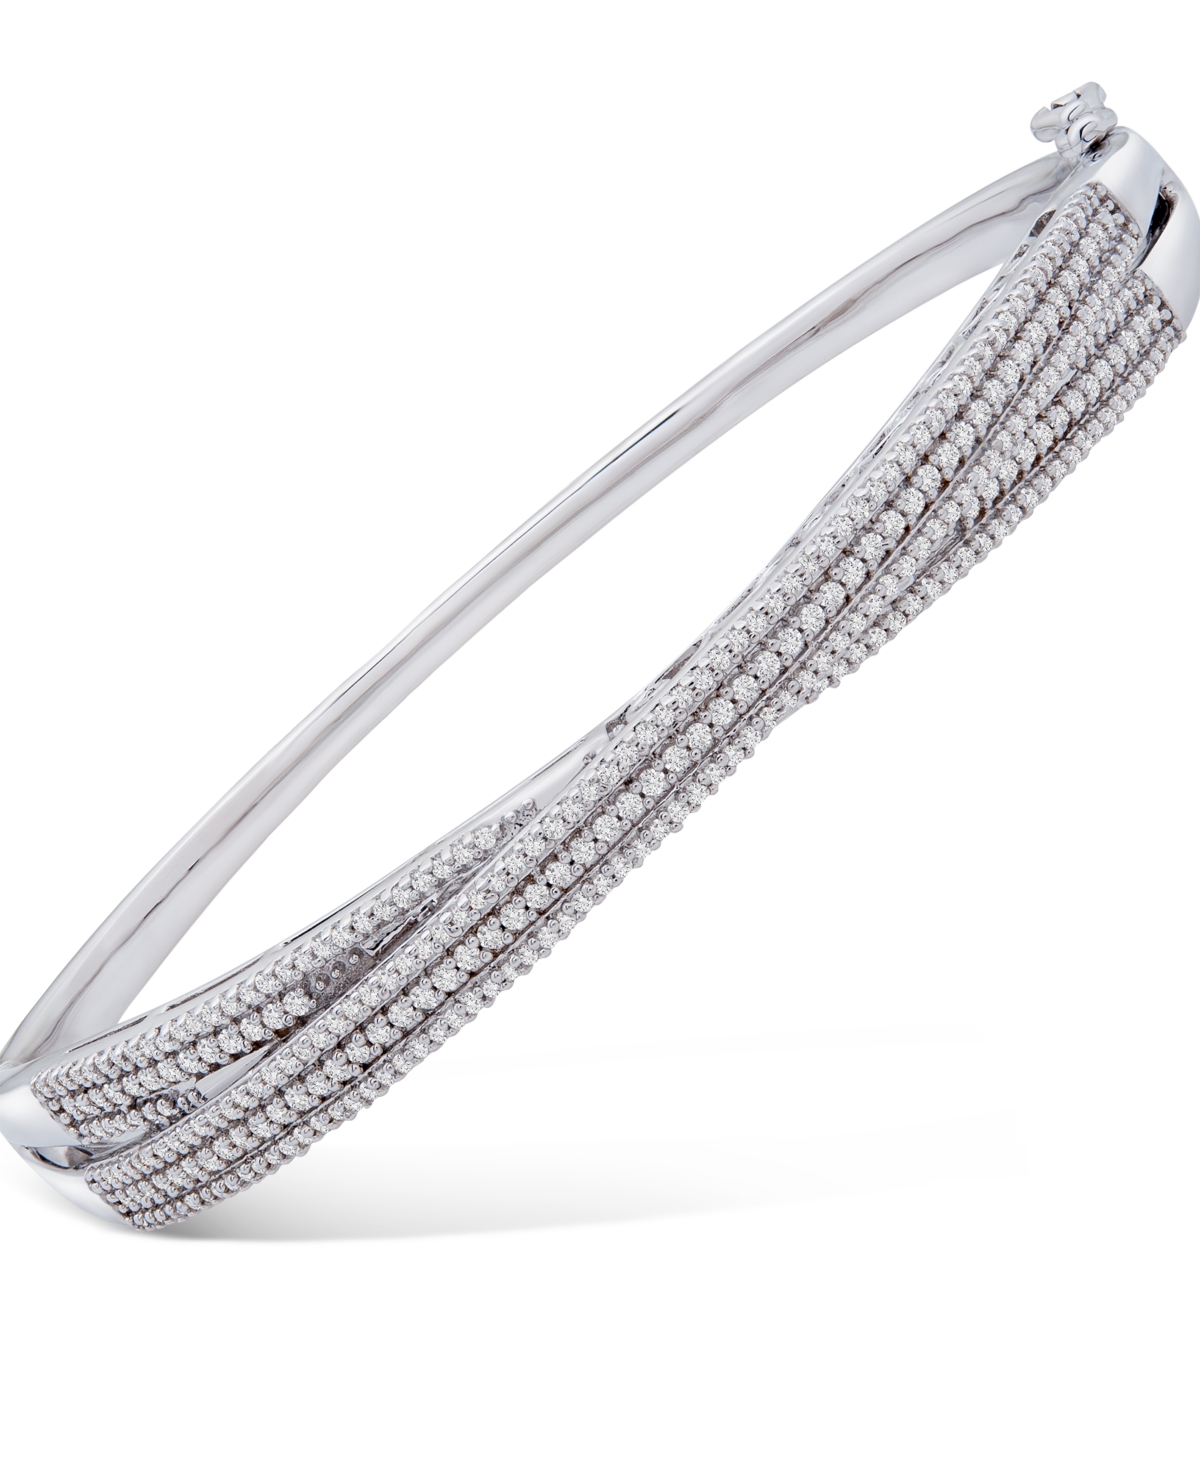 Diamond Multi-Row Crossover Bangle Bracelet (1 ct. t.w.) in Sterling Silver, Created for Macy's - Sterling Silver